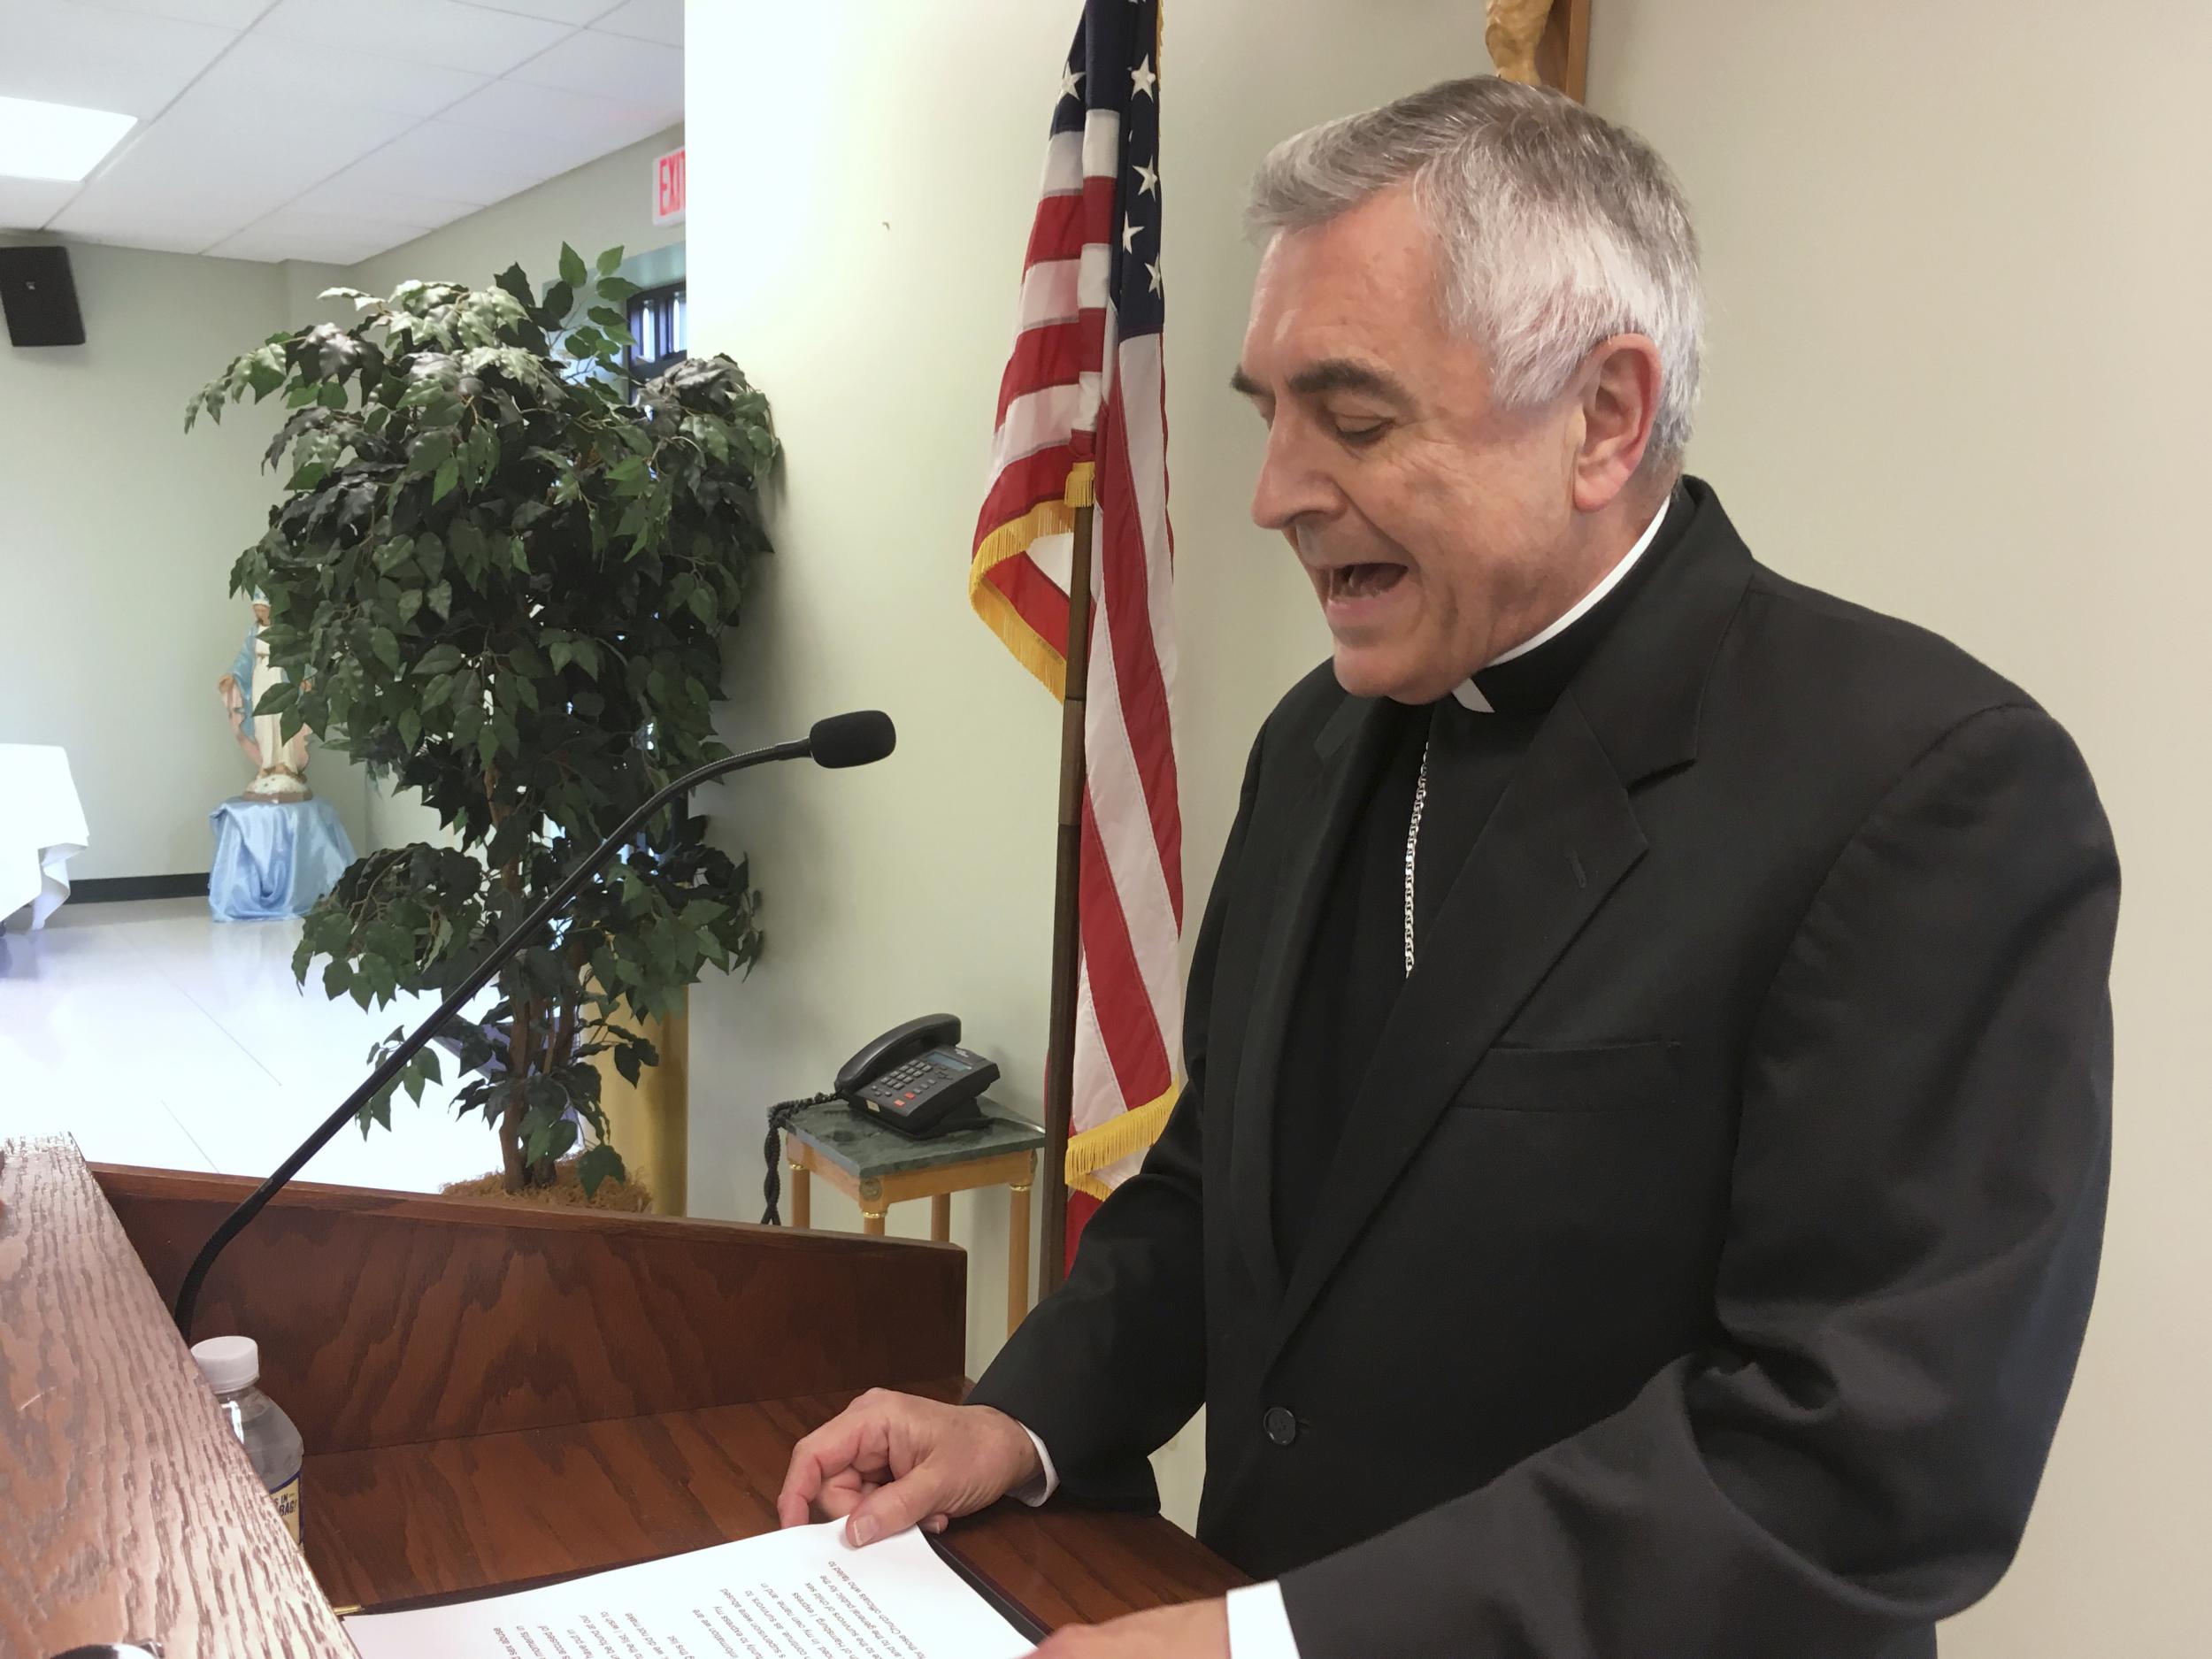 The Most Reverend Ronald Gainer, the Roman Catholic bishop of the diocese of Harrisburg, Pennsylvania, discusses child sexual abuse by clergy